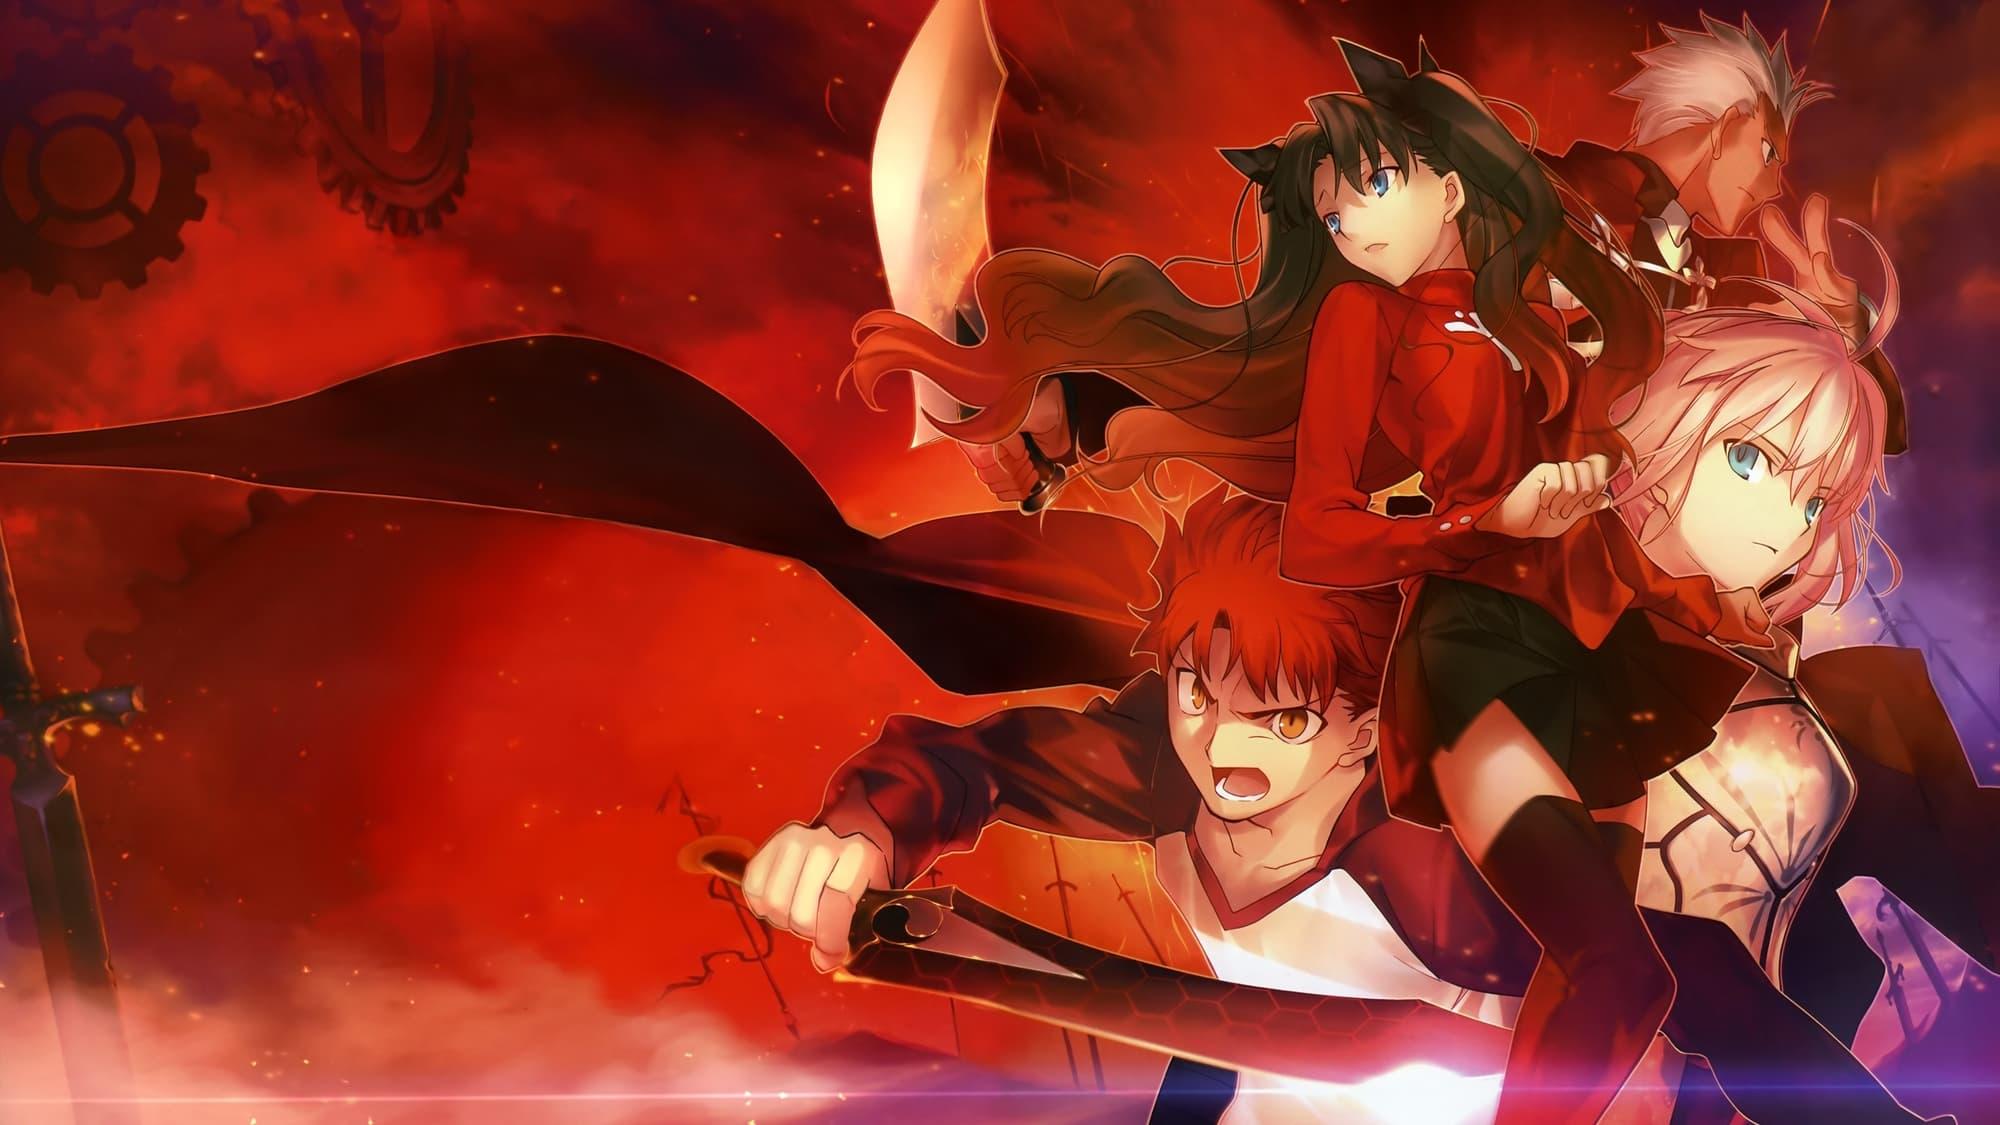 Fate/stay night: Unlimited Blade Works backdrop